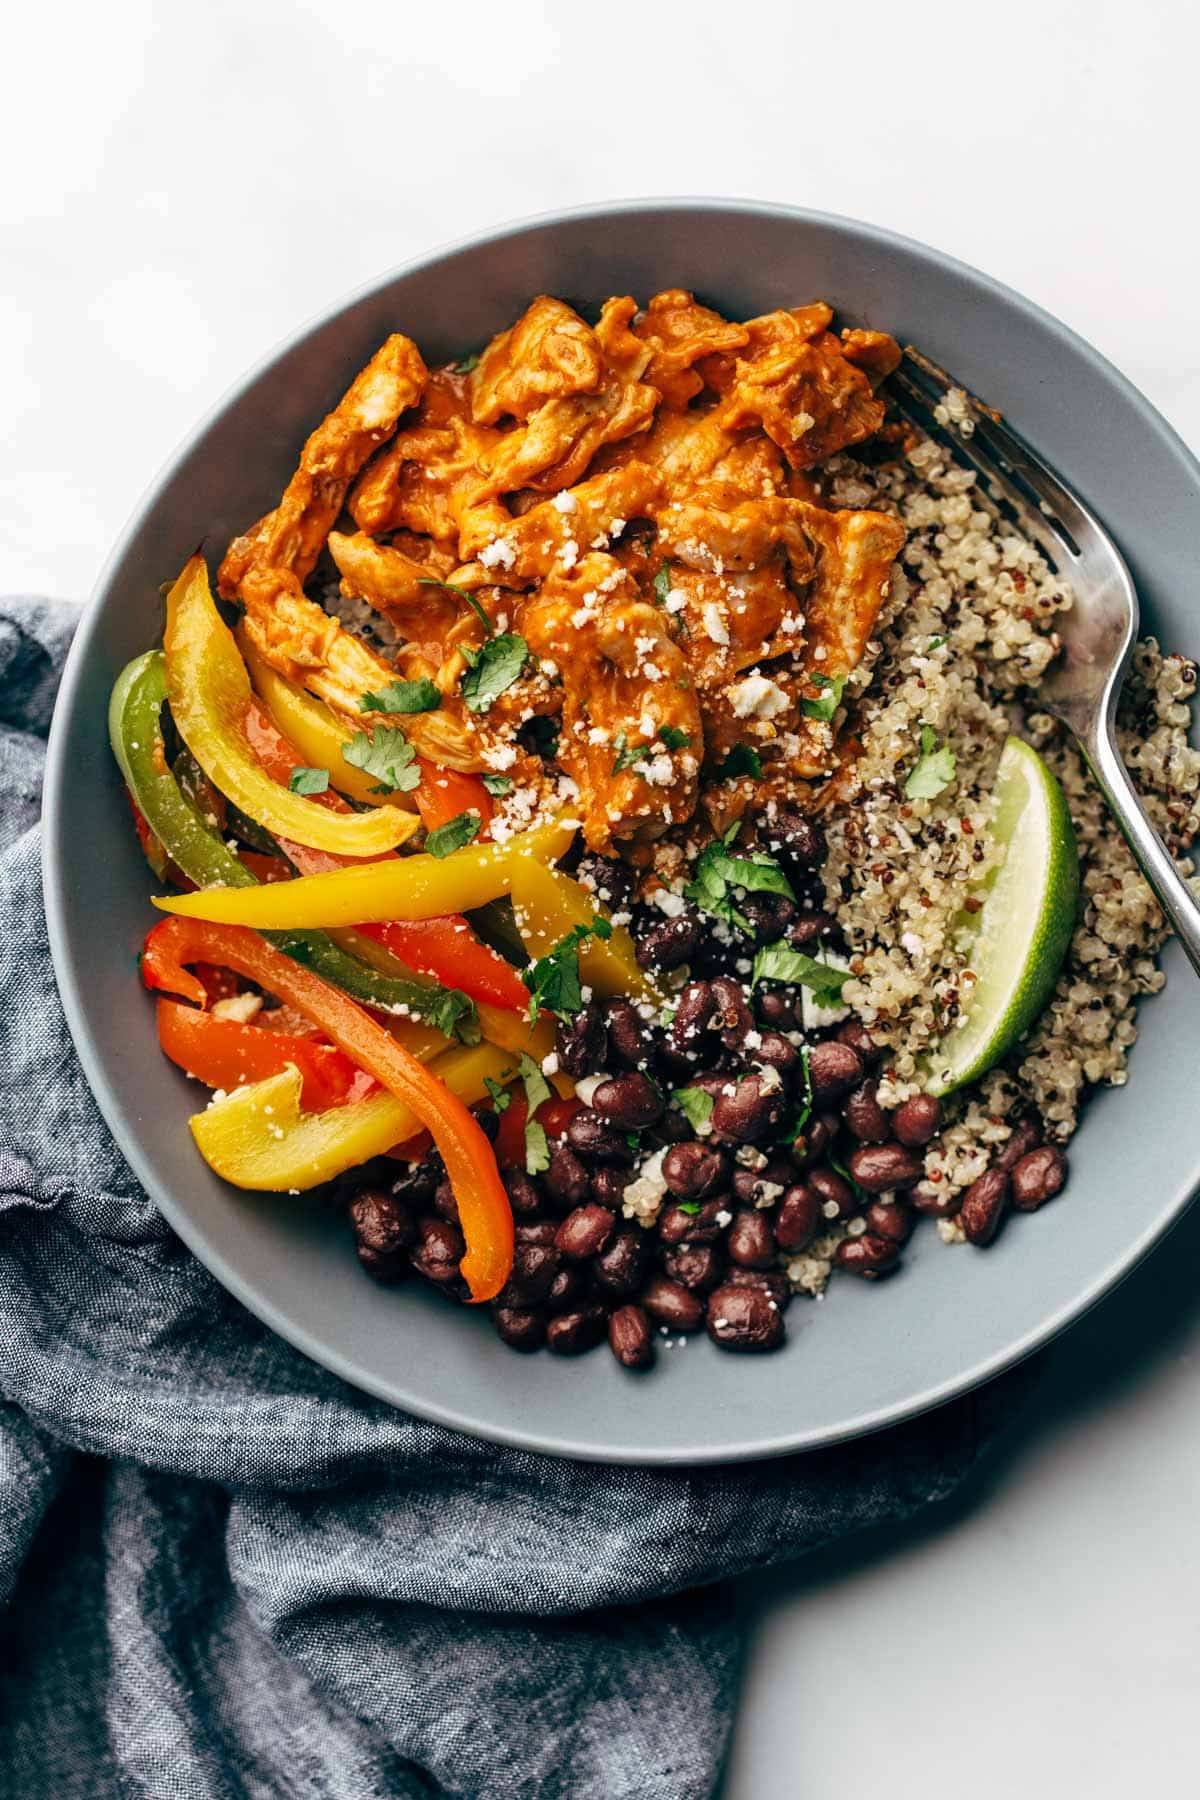 Chicken tinga in a bowl for meal prep.